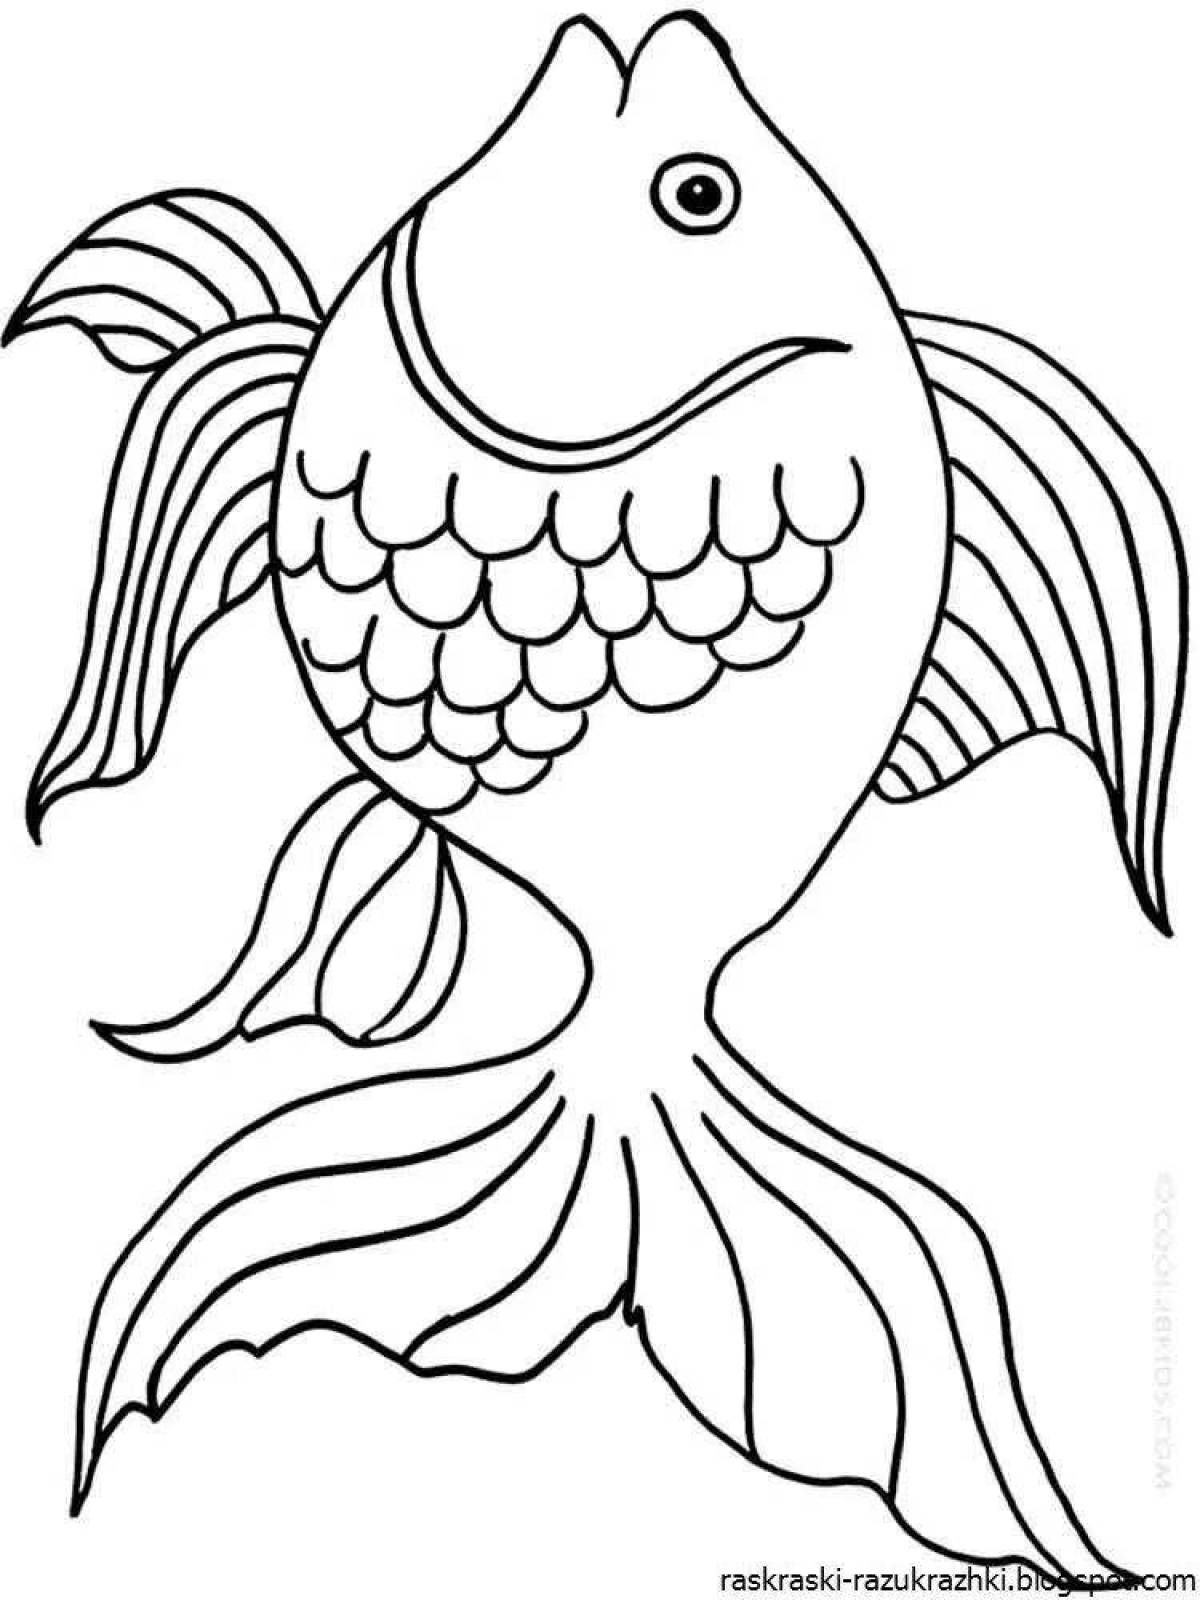 Colorful goldfish coloring pages for kids